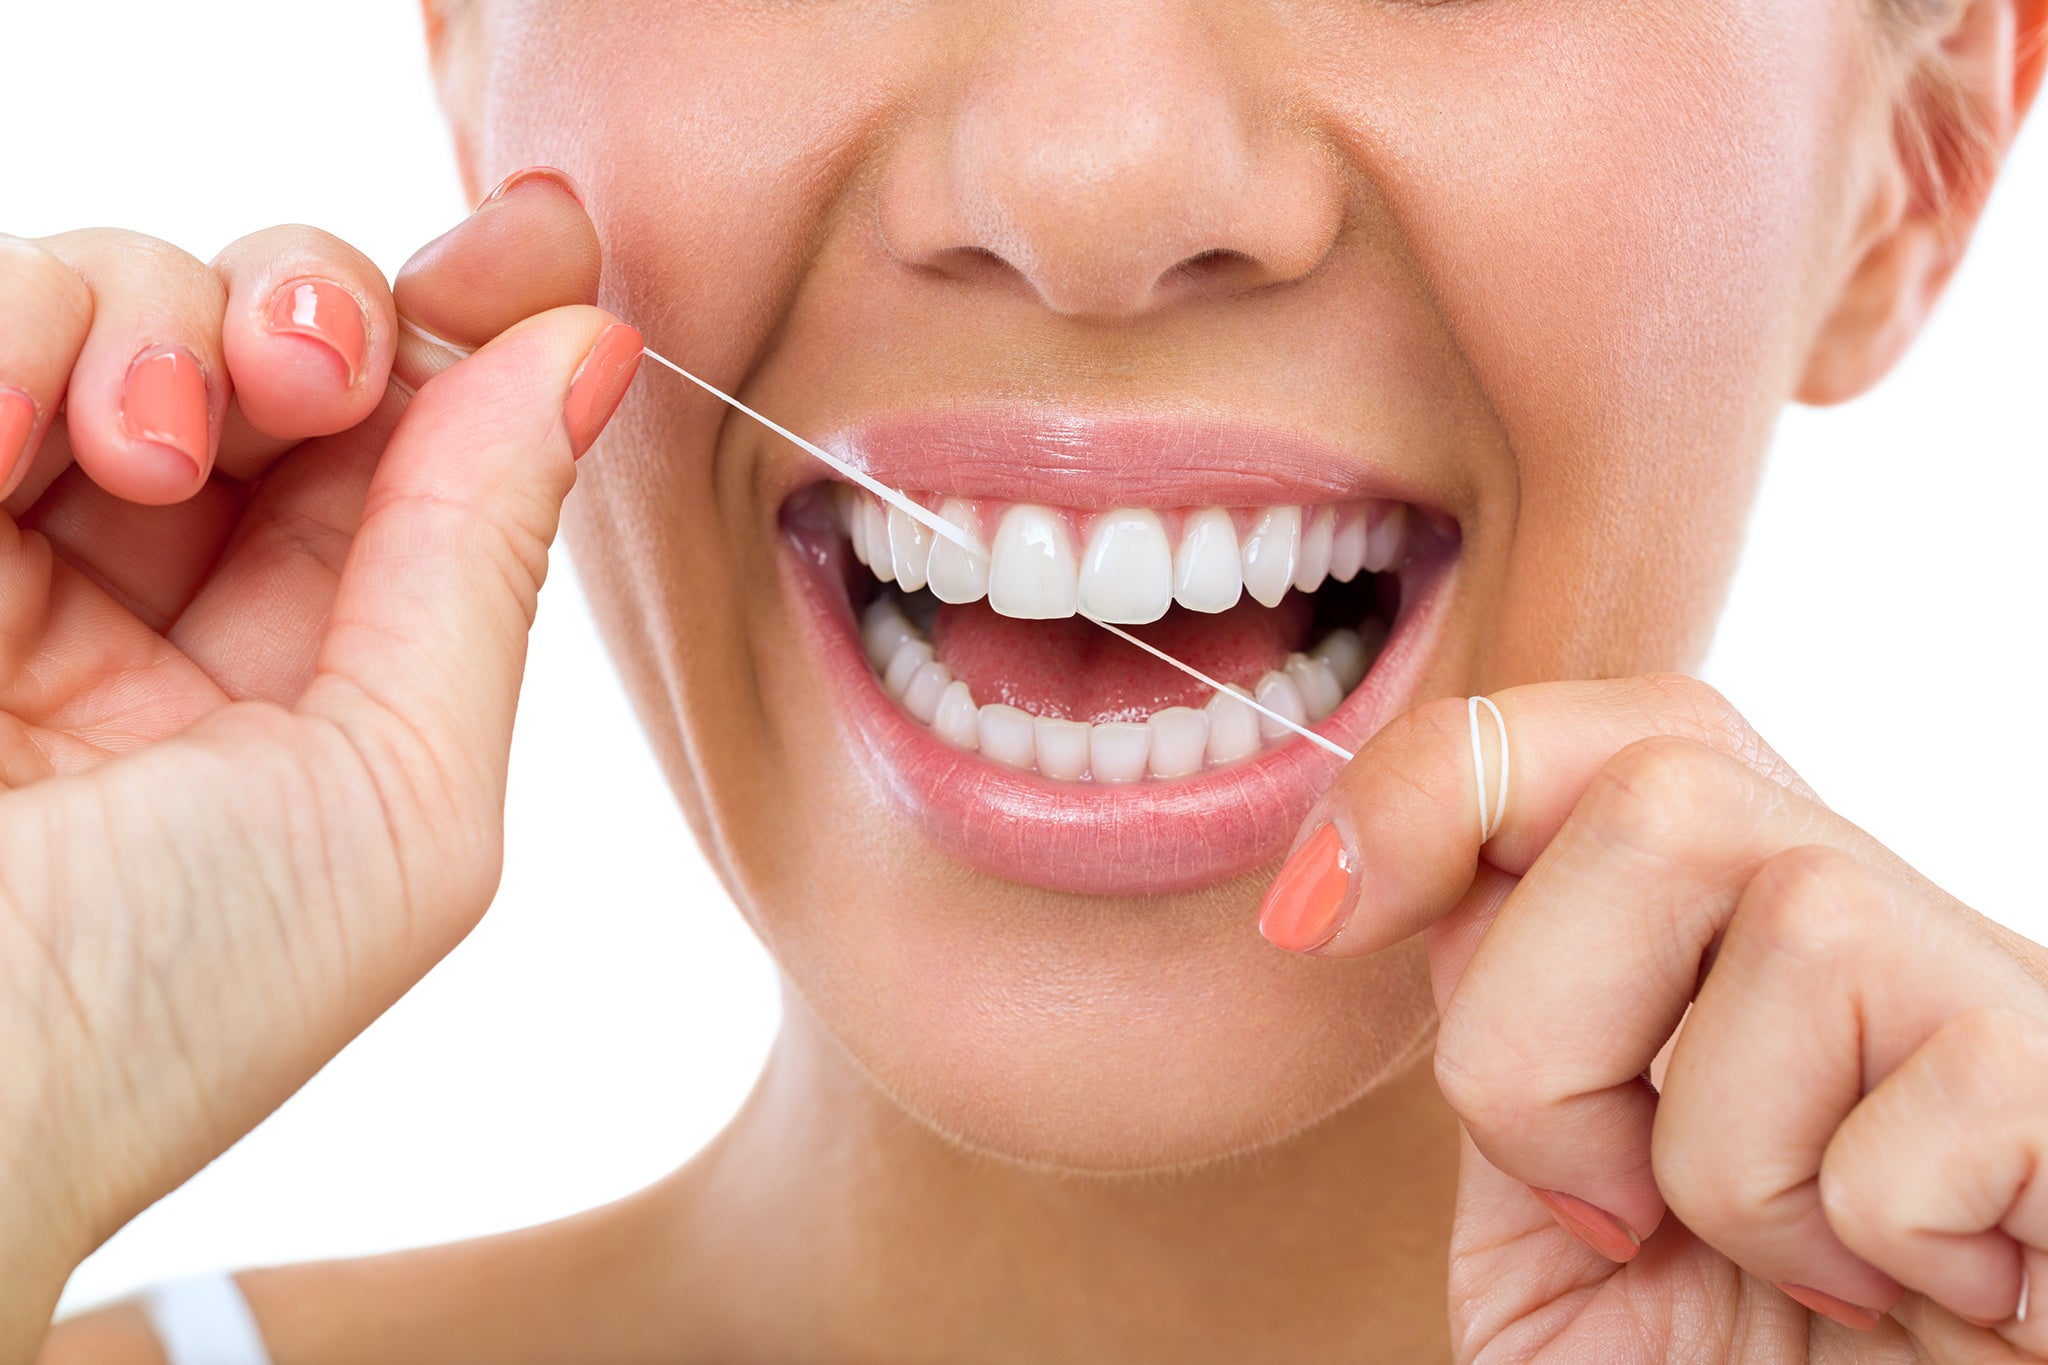 Interdental Brush vs. Floss: Which One Should You Choose?